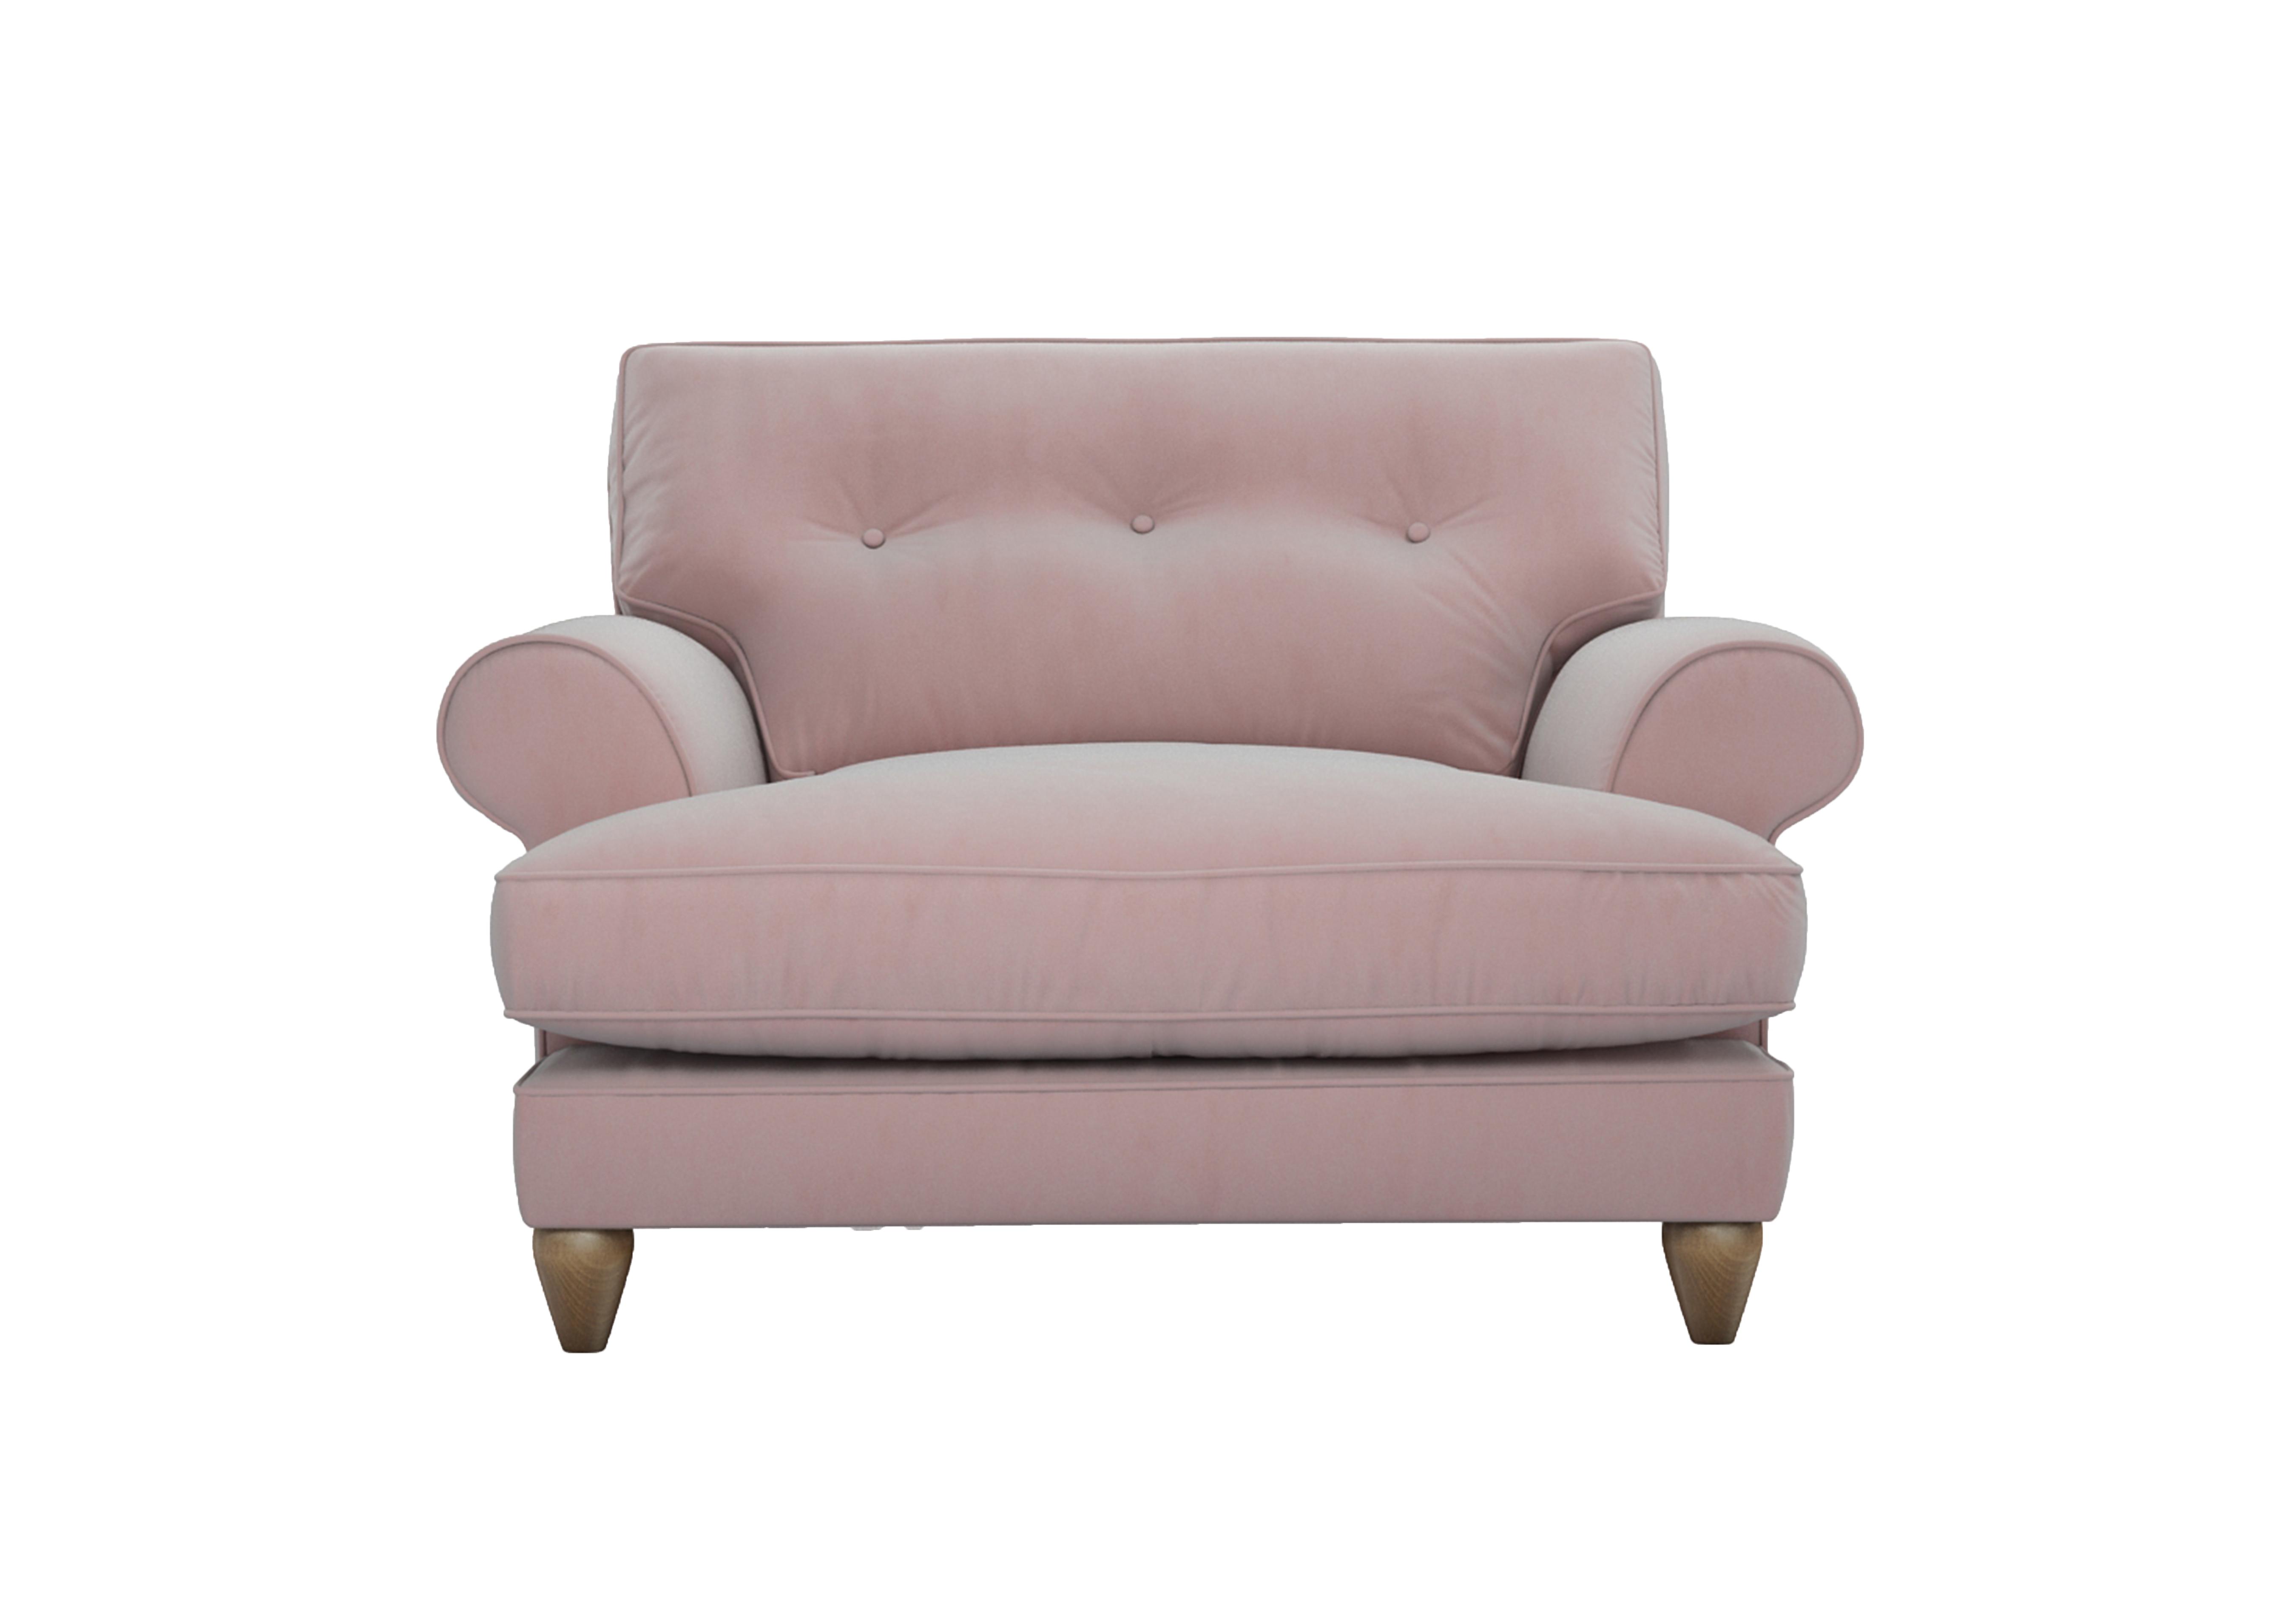 Bronwyn Fabric Classic Back Snuggler in Cot256 Cotton Candy on Furniture Village